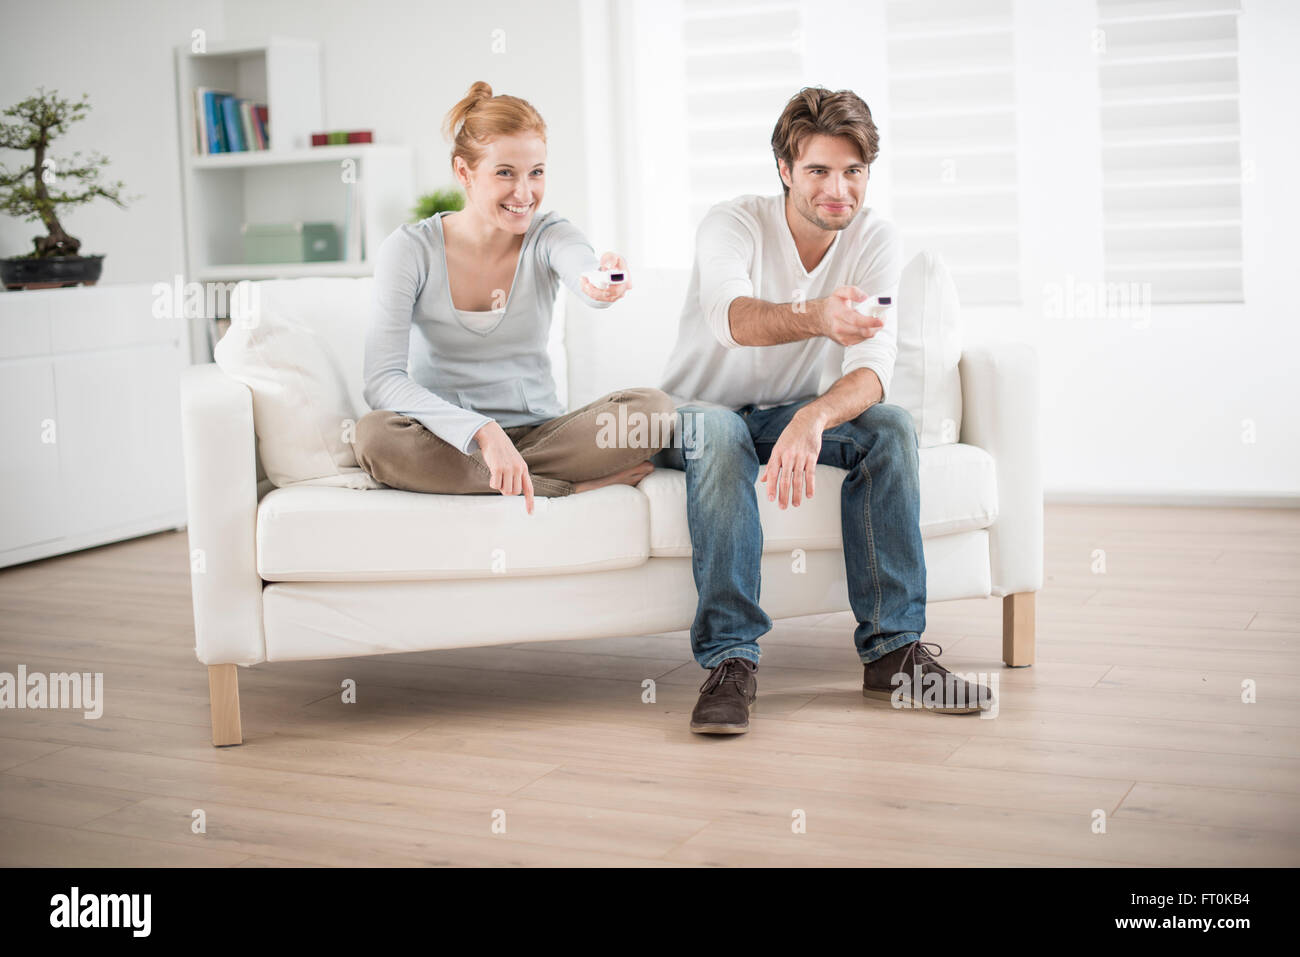 cheerful couple play to video game on a couch Stock Photo